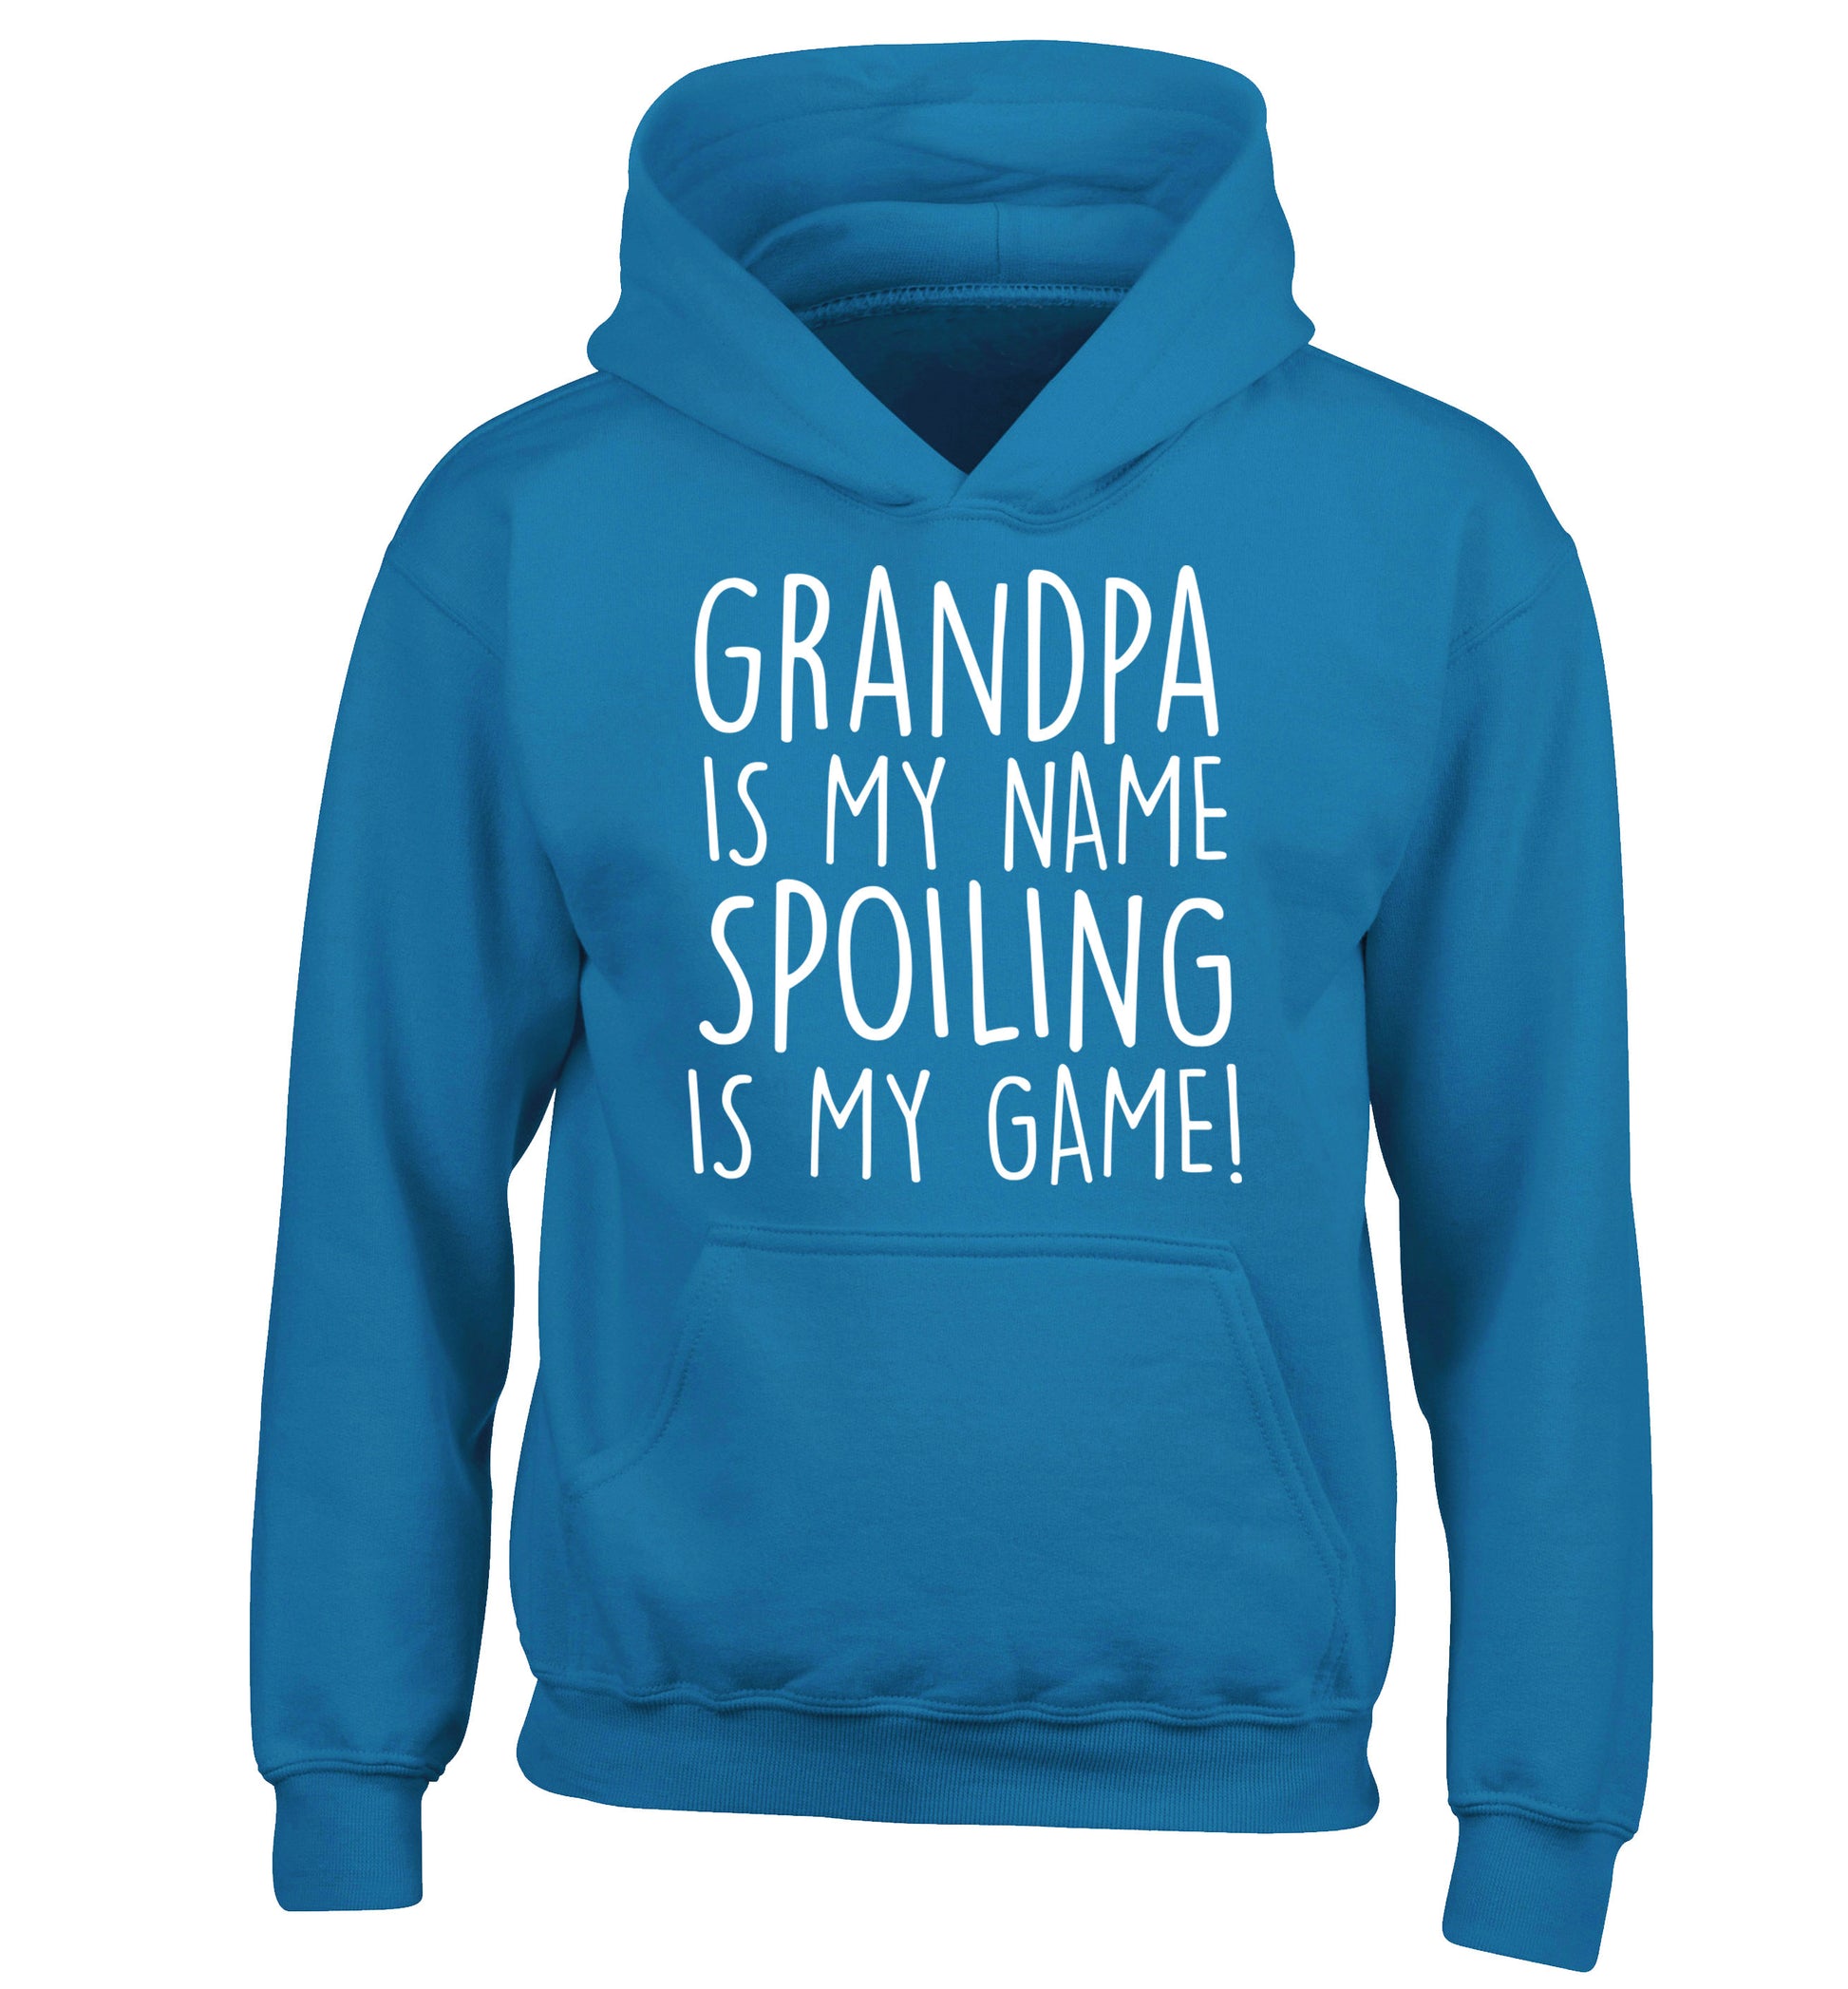 Grandpa is my name, spoiling is my game children's blue hoodie 12-14 Years